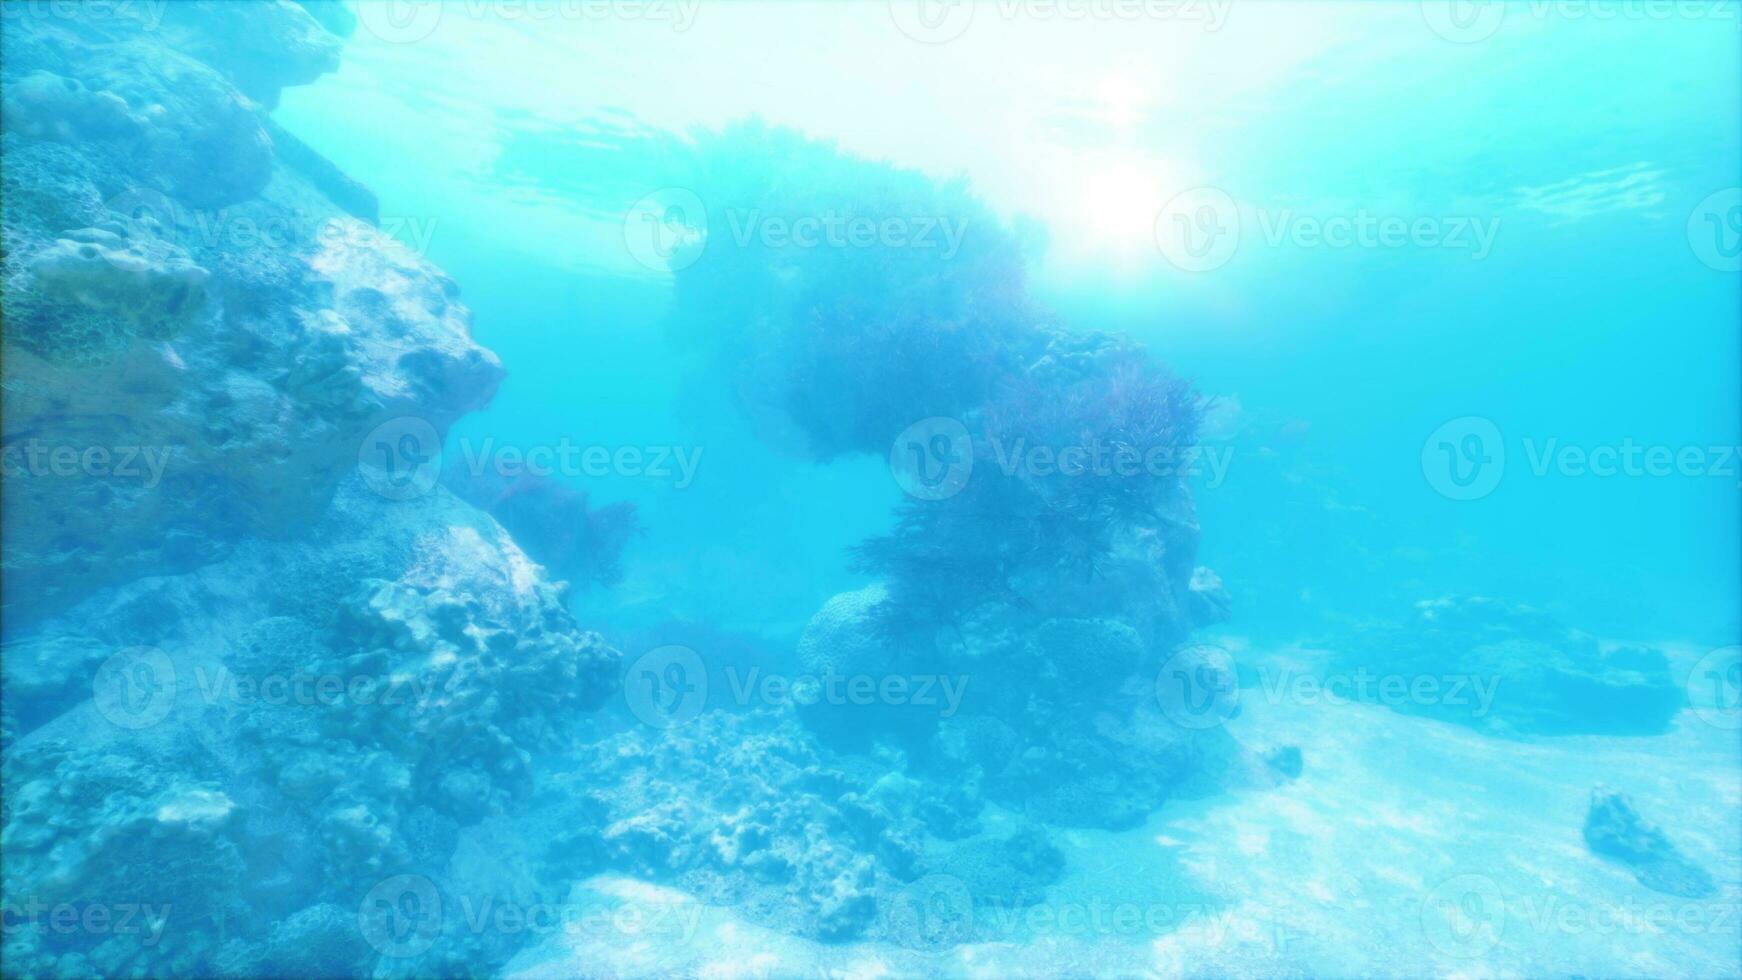 An underwater view of a rock formation in the ocean photo